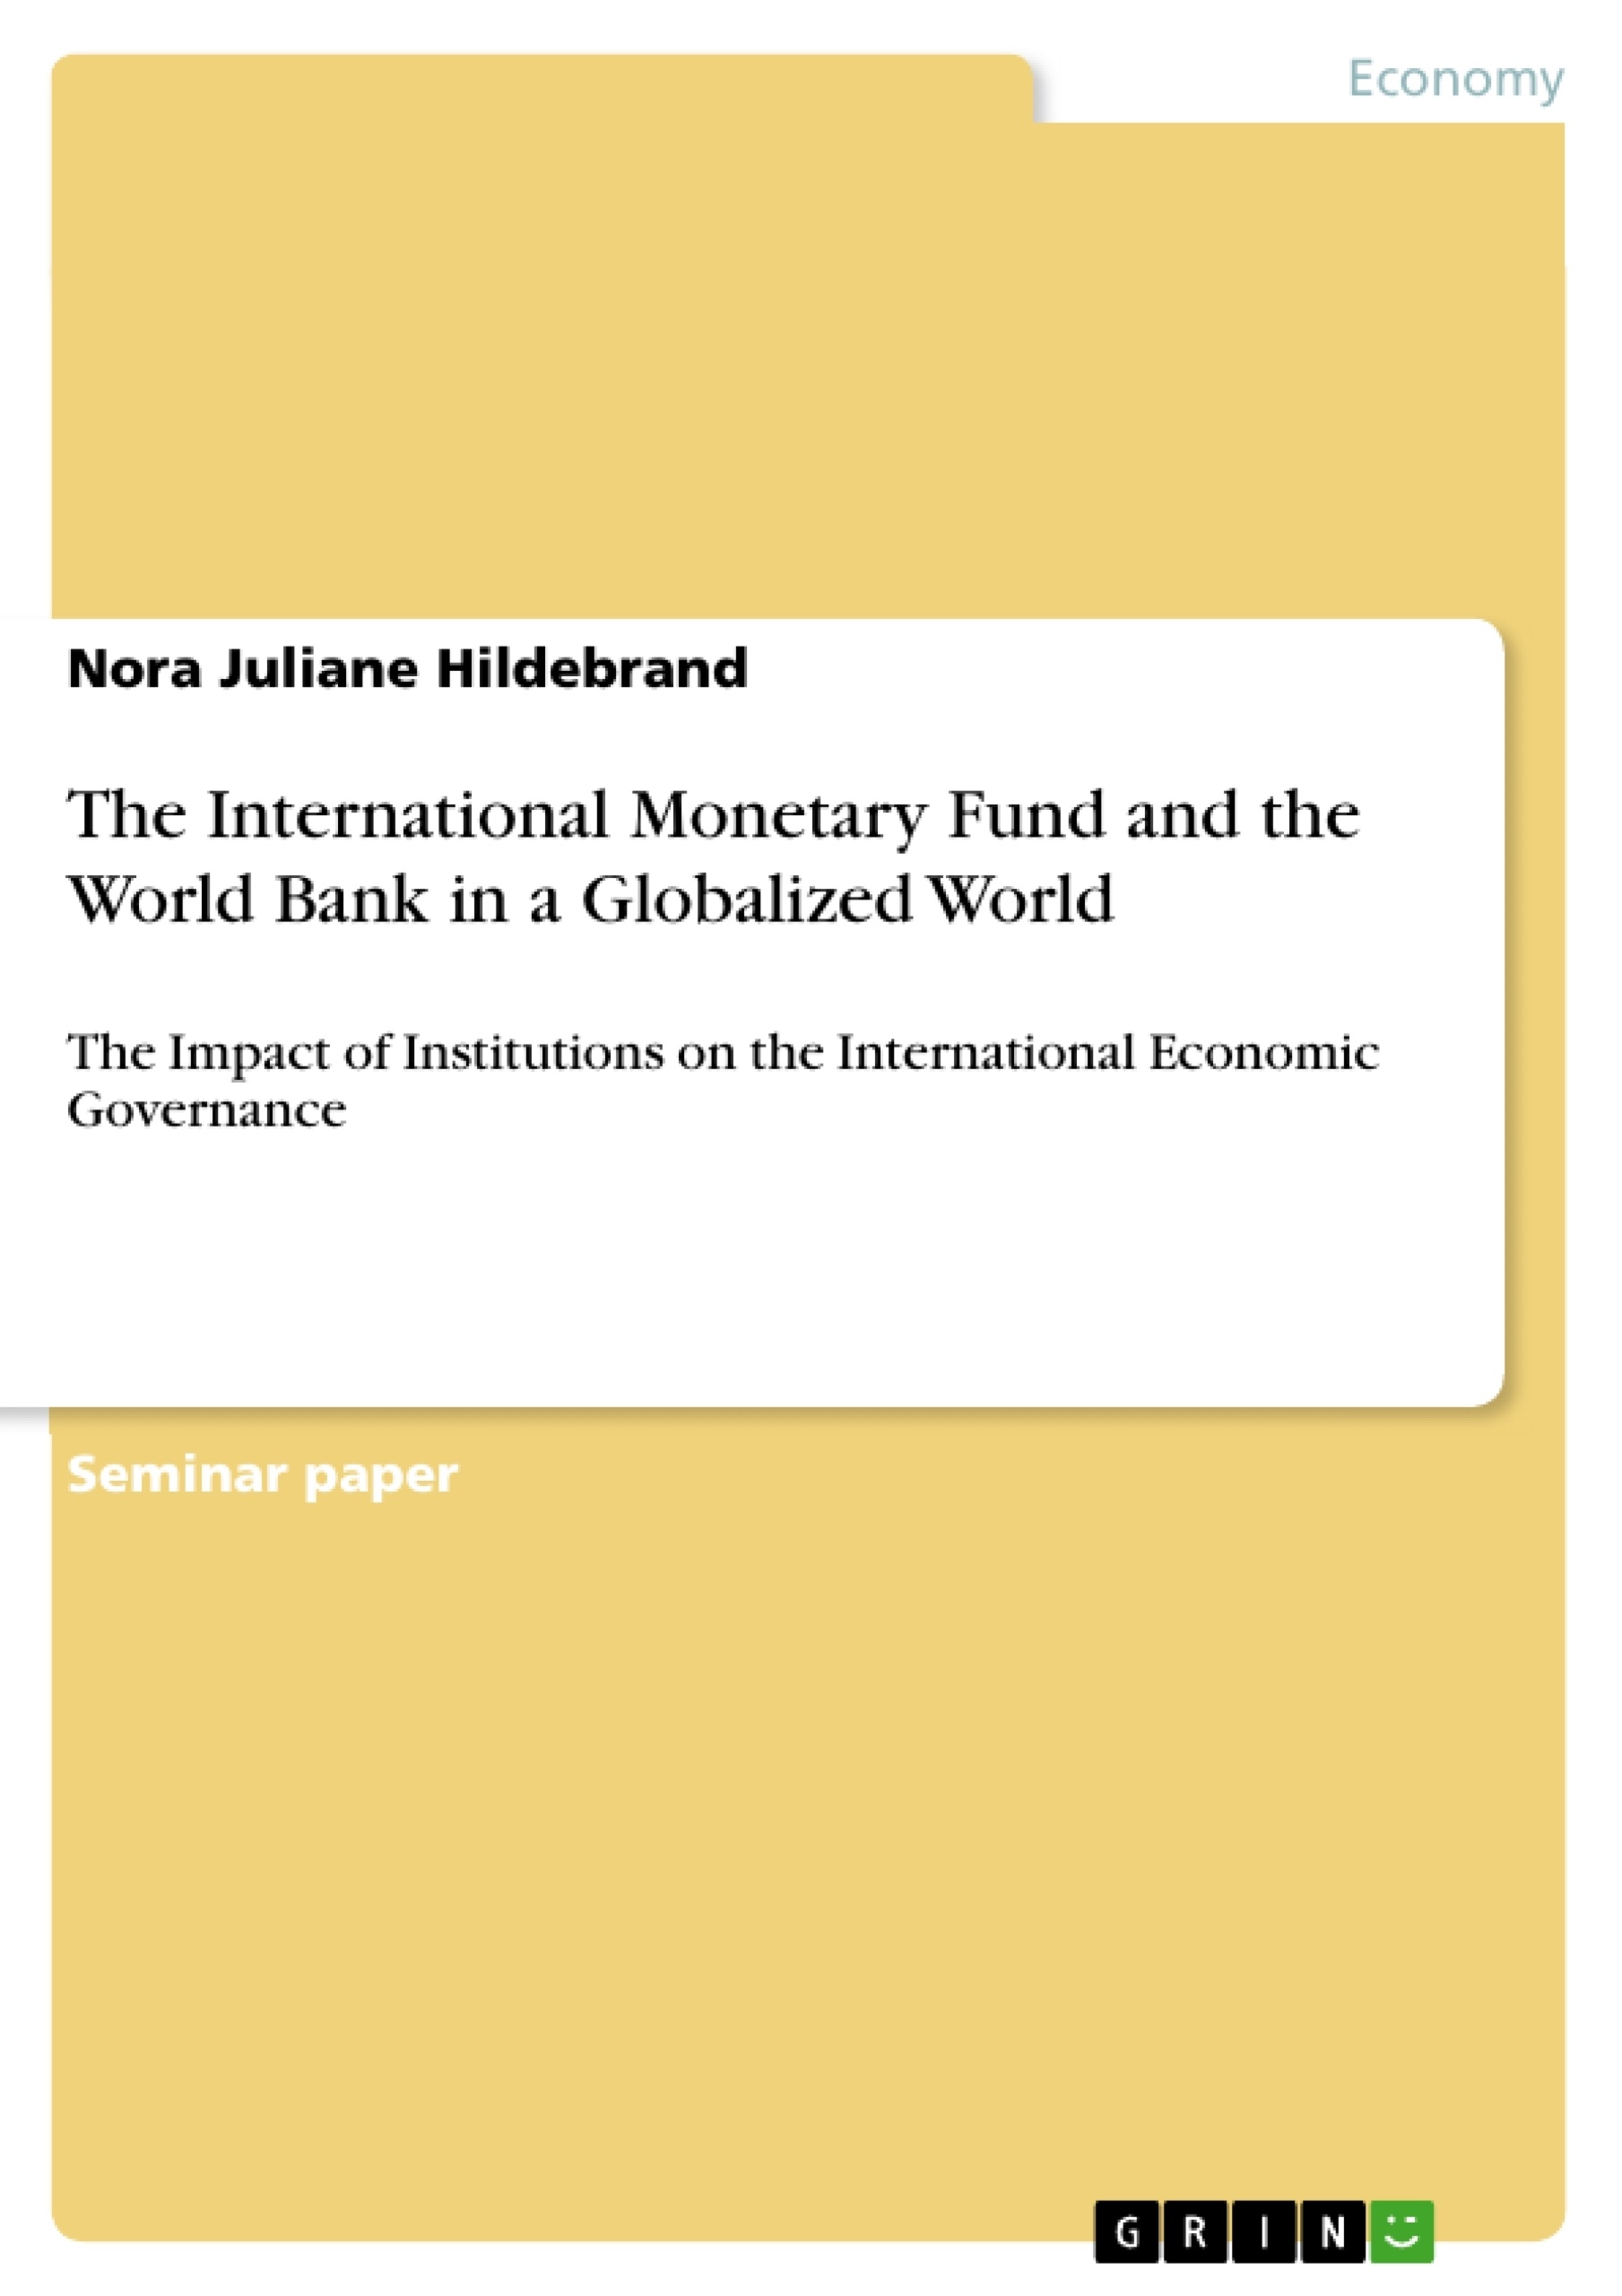 Title: The International Monetary Fund and the World Bank in a Globalized World